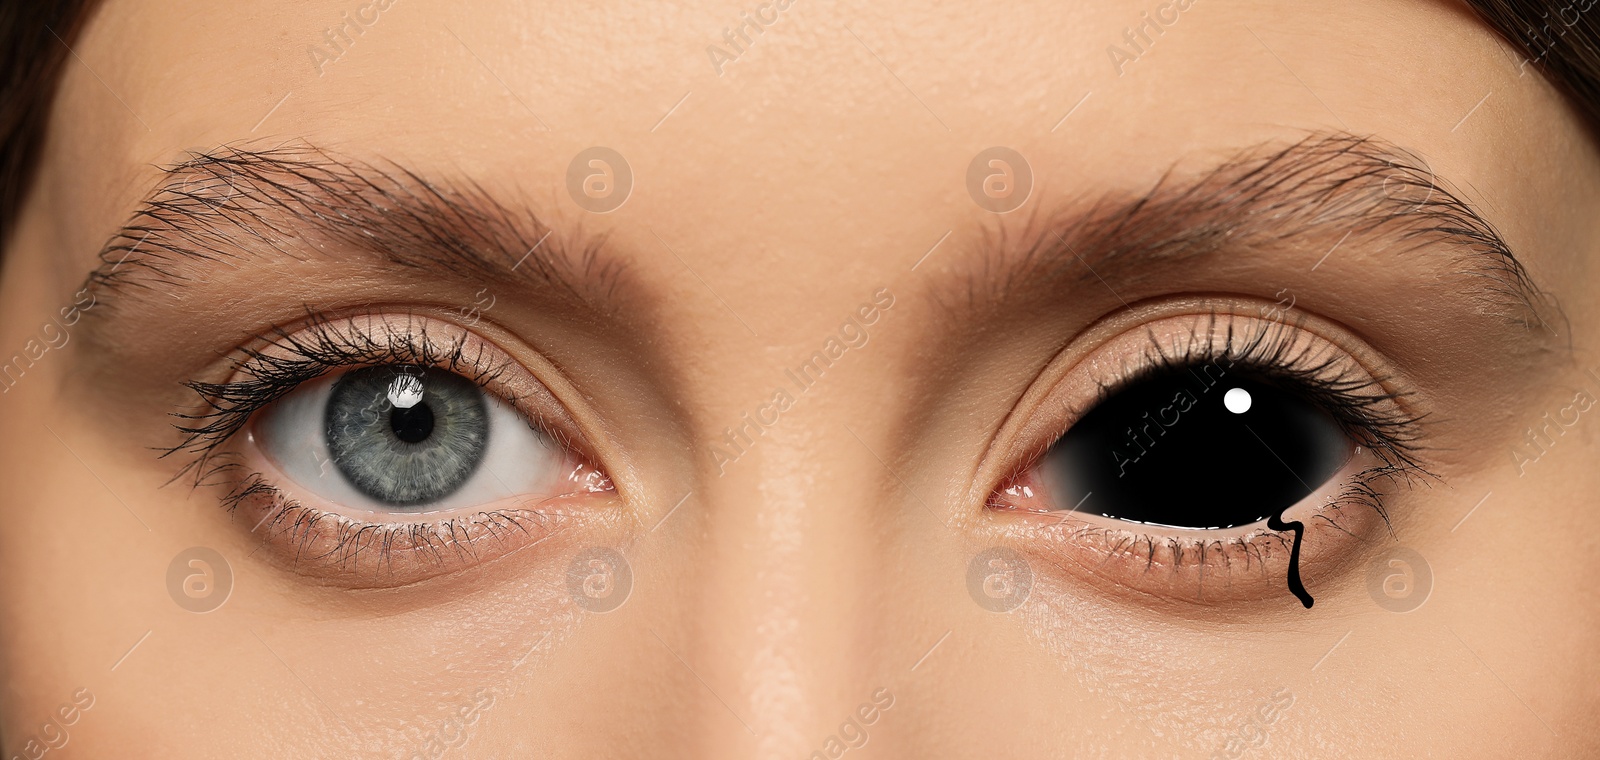 Image of Paranormality, supernatural or mental disorders concepts. Something black filling sclera and flowing from it. Woman with weird eye, closeup